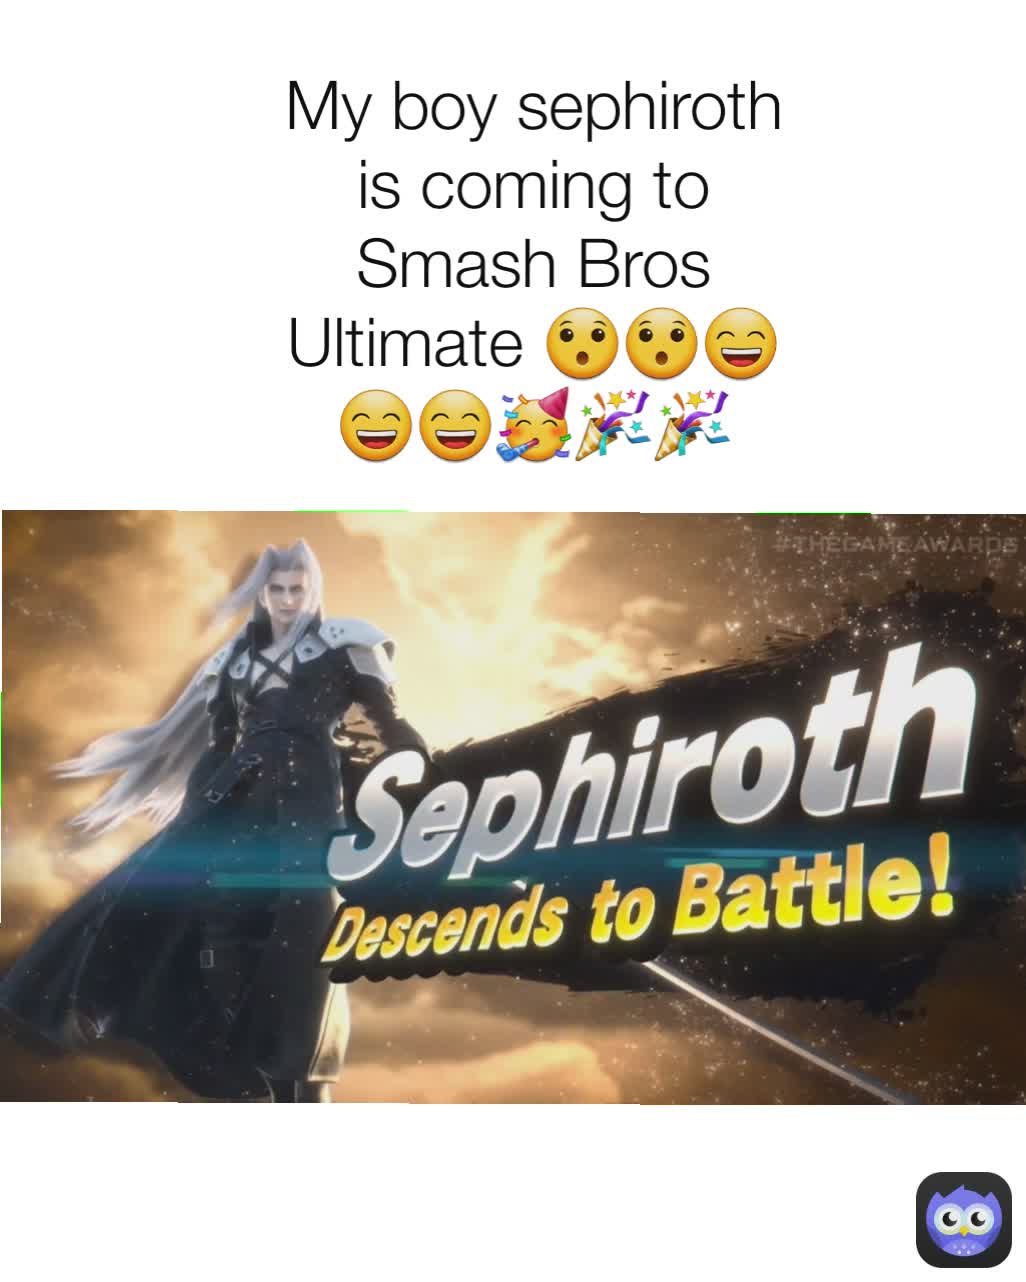 My boy sephiroth is coming to Smash Bros Ultimate 😯😯😄😄😄🥳🎉🎉